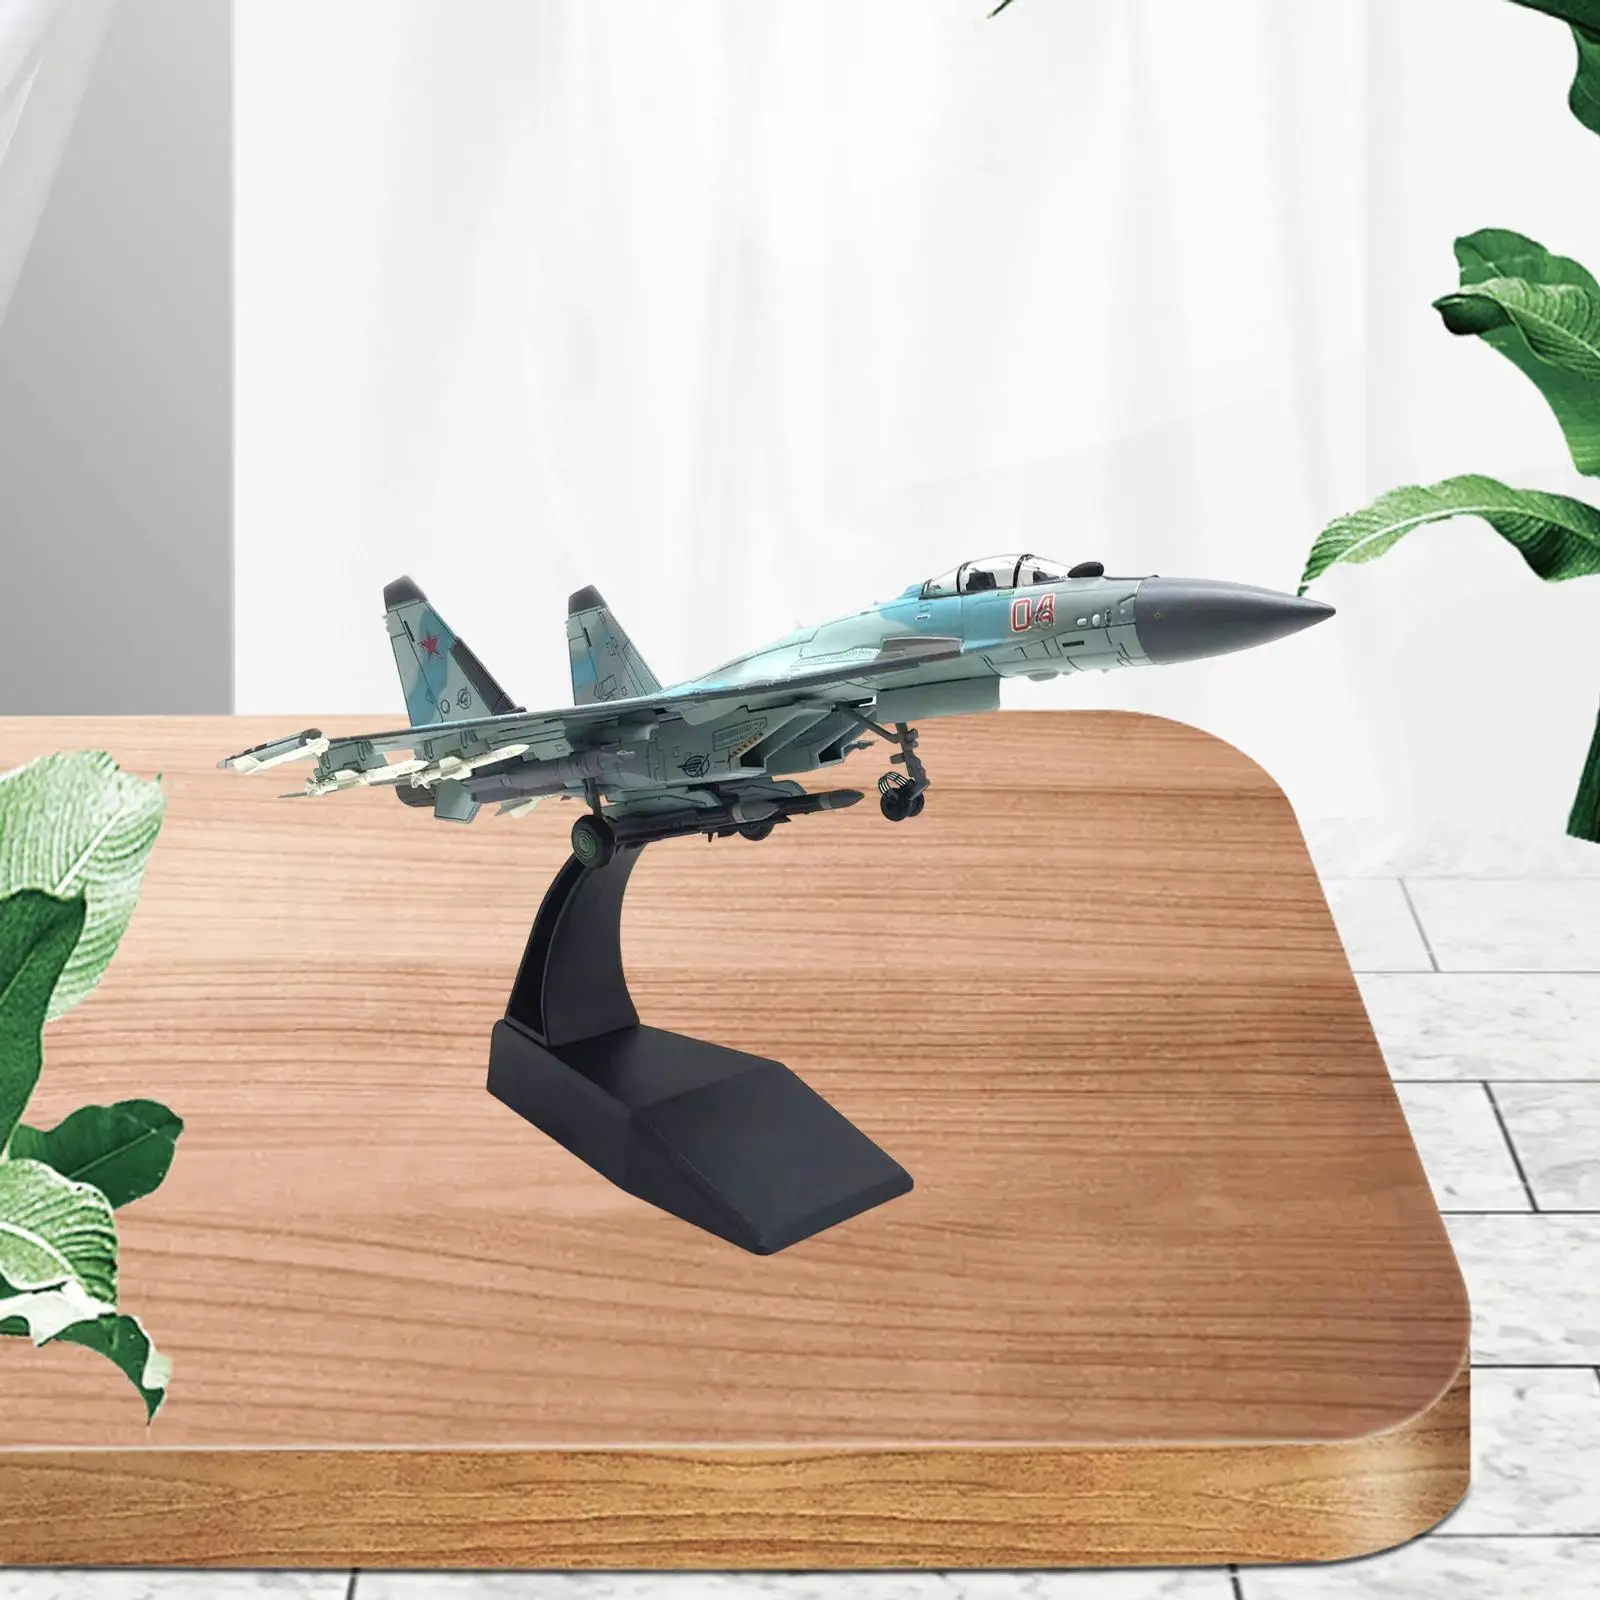 1/100 Fighter Model Airplane Alloy Diecast Aircraft for Desktop Decor